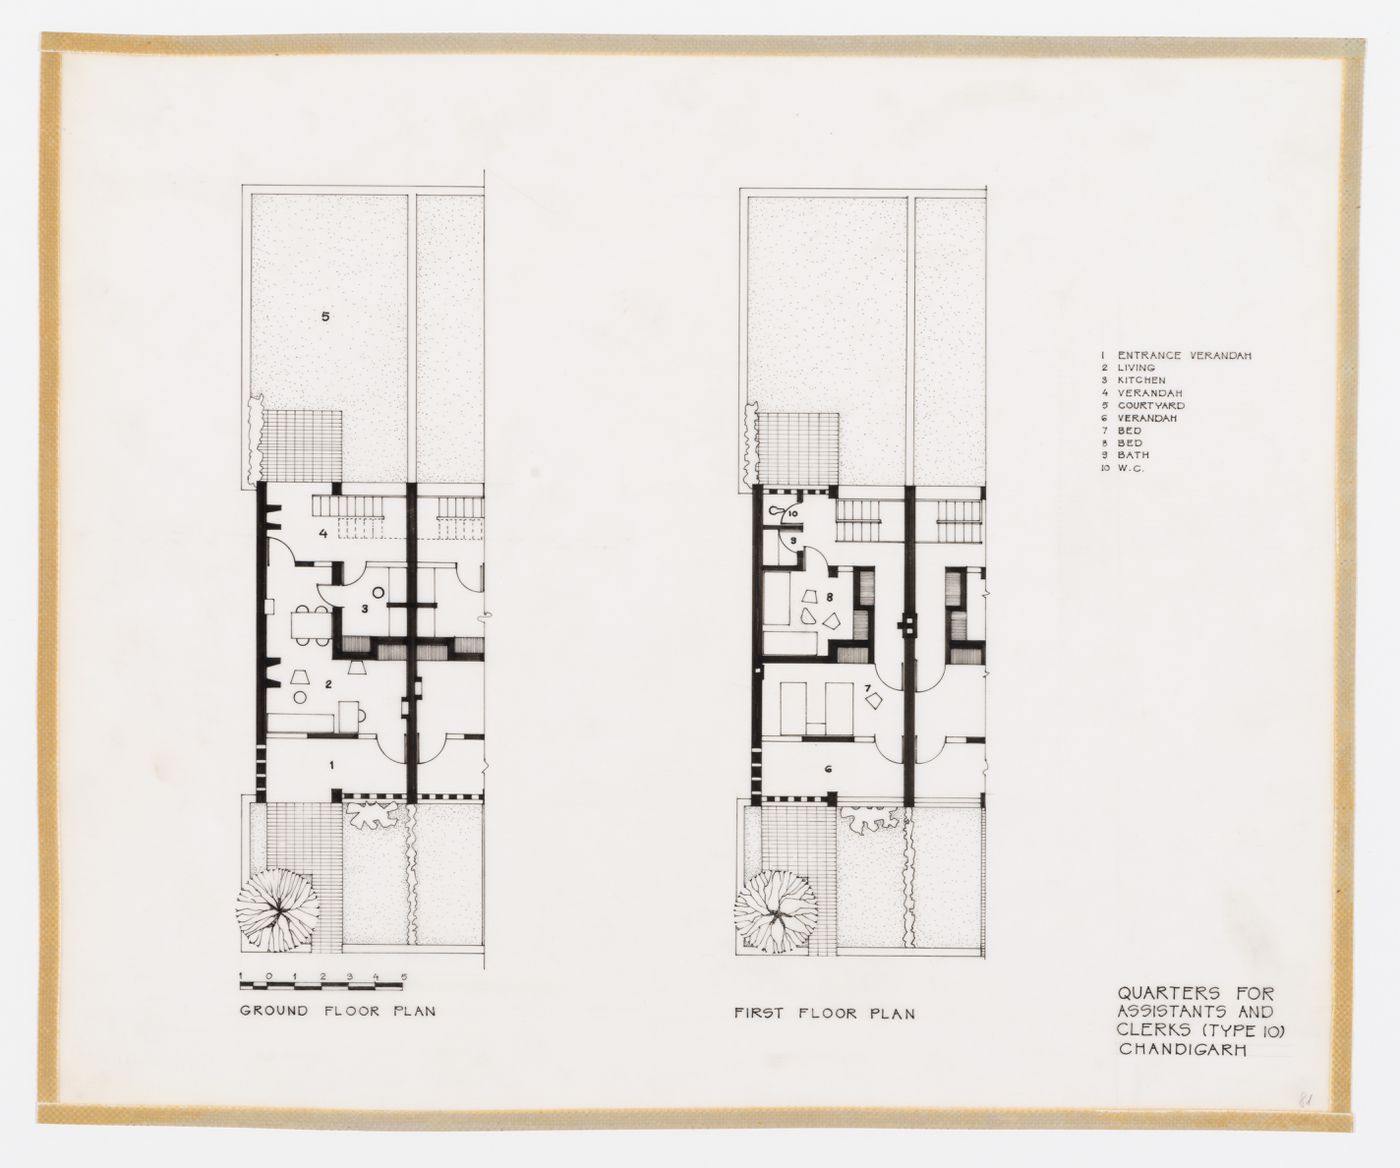 Floor plans for the Quarters for assistants and clerks, House Type 10, in Chandigarh, India